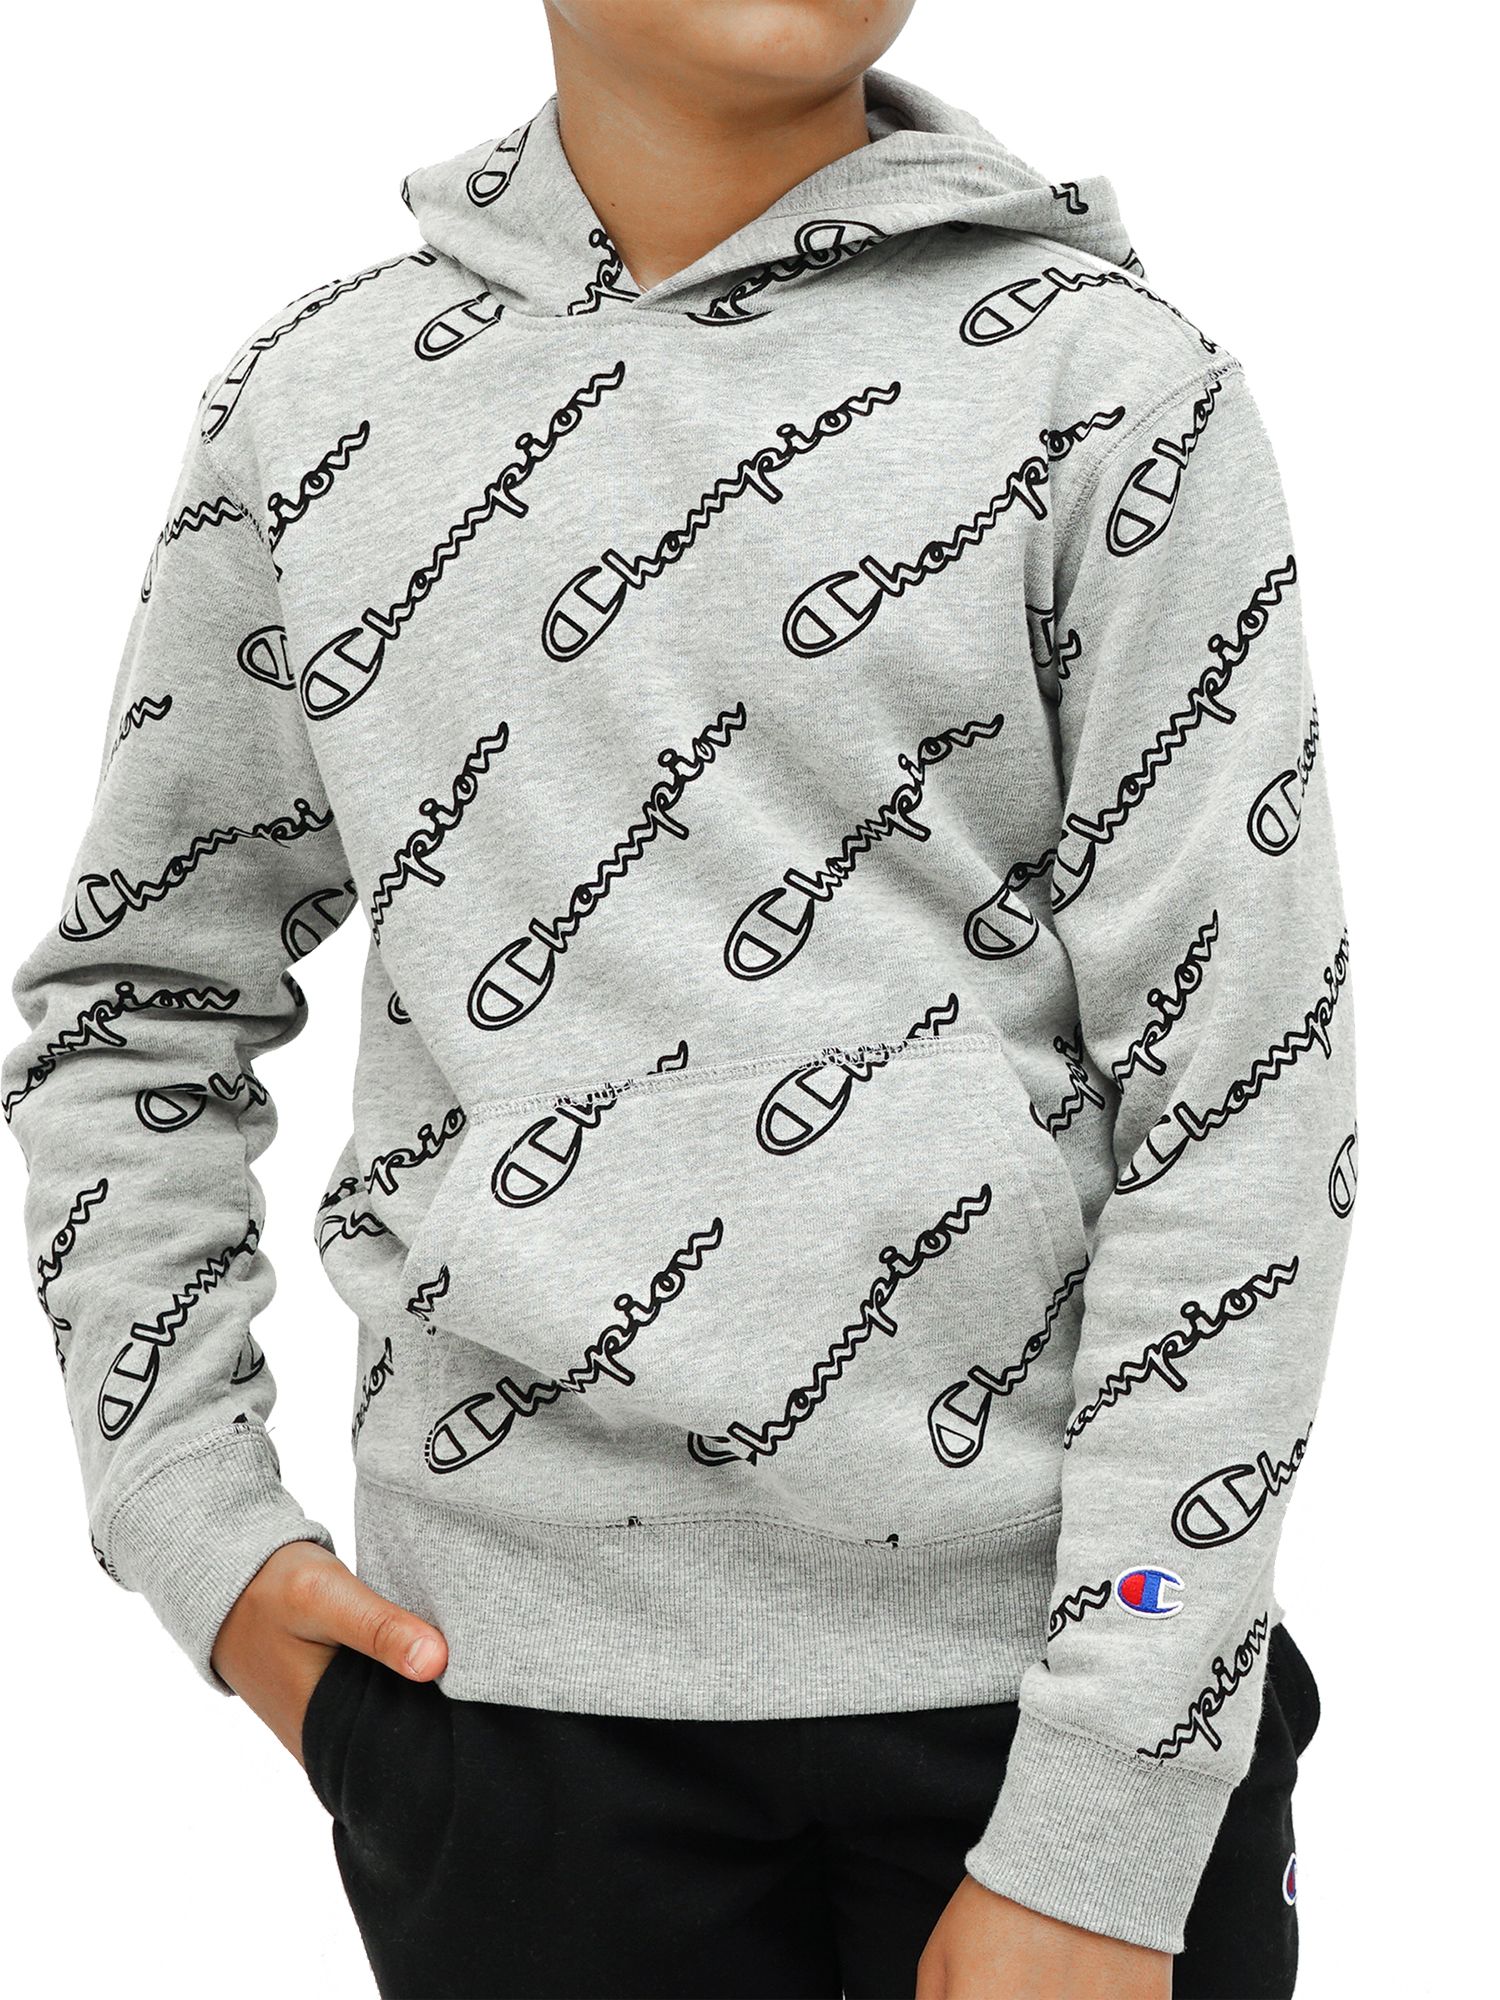 champion hoodie with champion written all over it